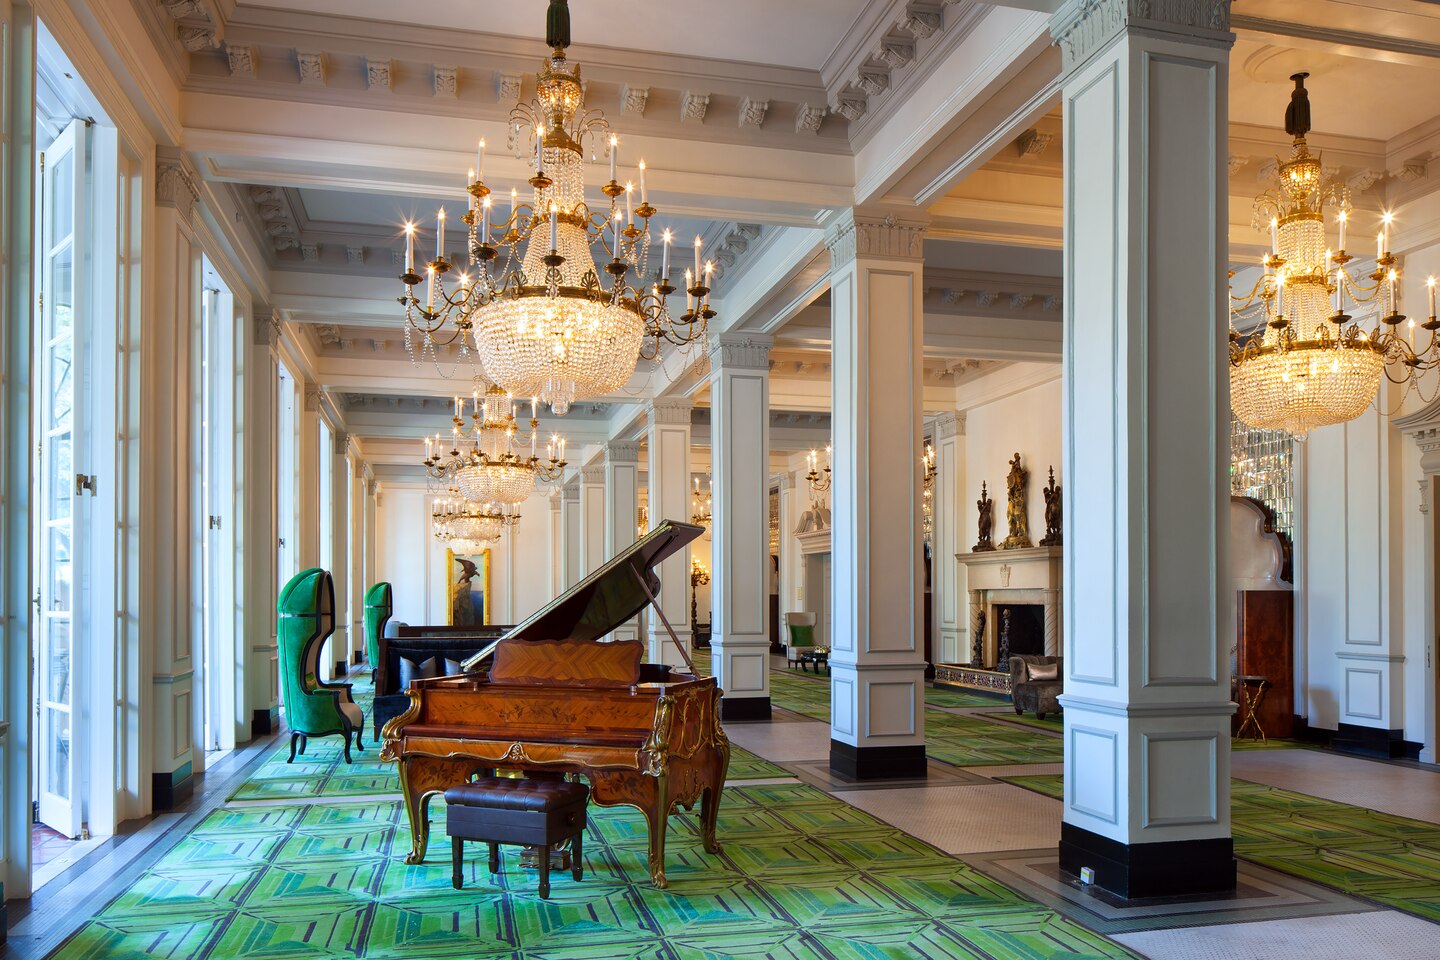 a piano in a room with green carpet and chandeliers